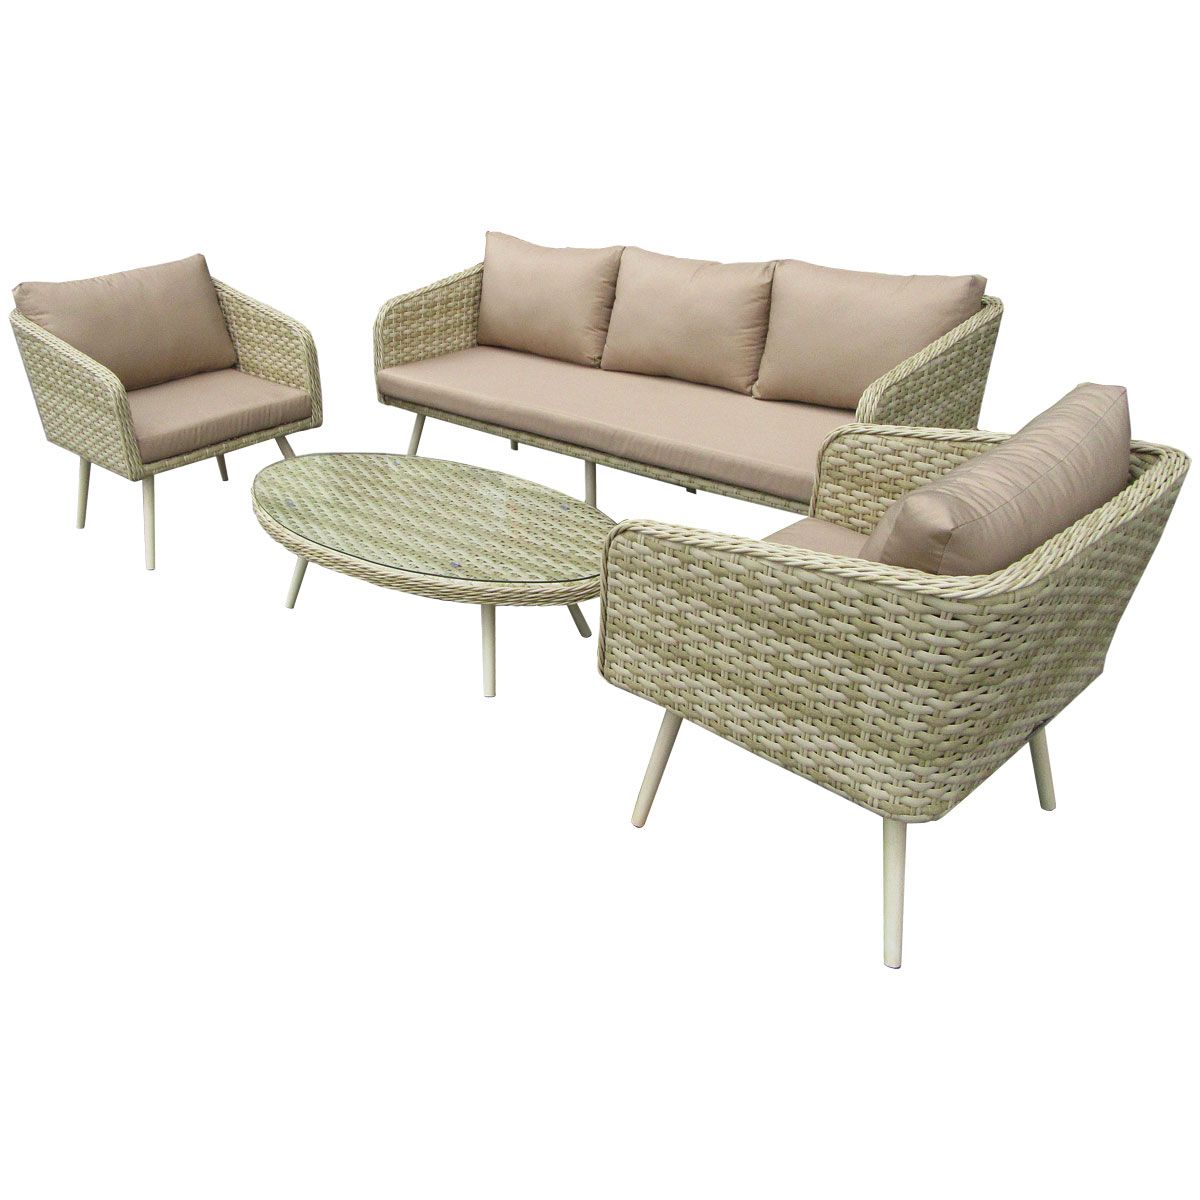 Natural Woven Modern Outdoor Chairs Sets Pertaining To Well Liked Premium Rattan Lounge Set Outdoor Garden Furniture Natural Sand (View 9 of 15)